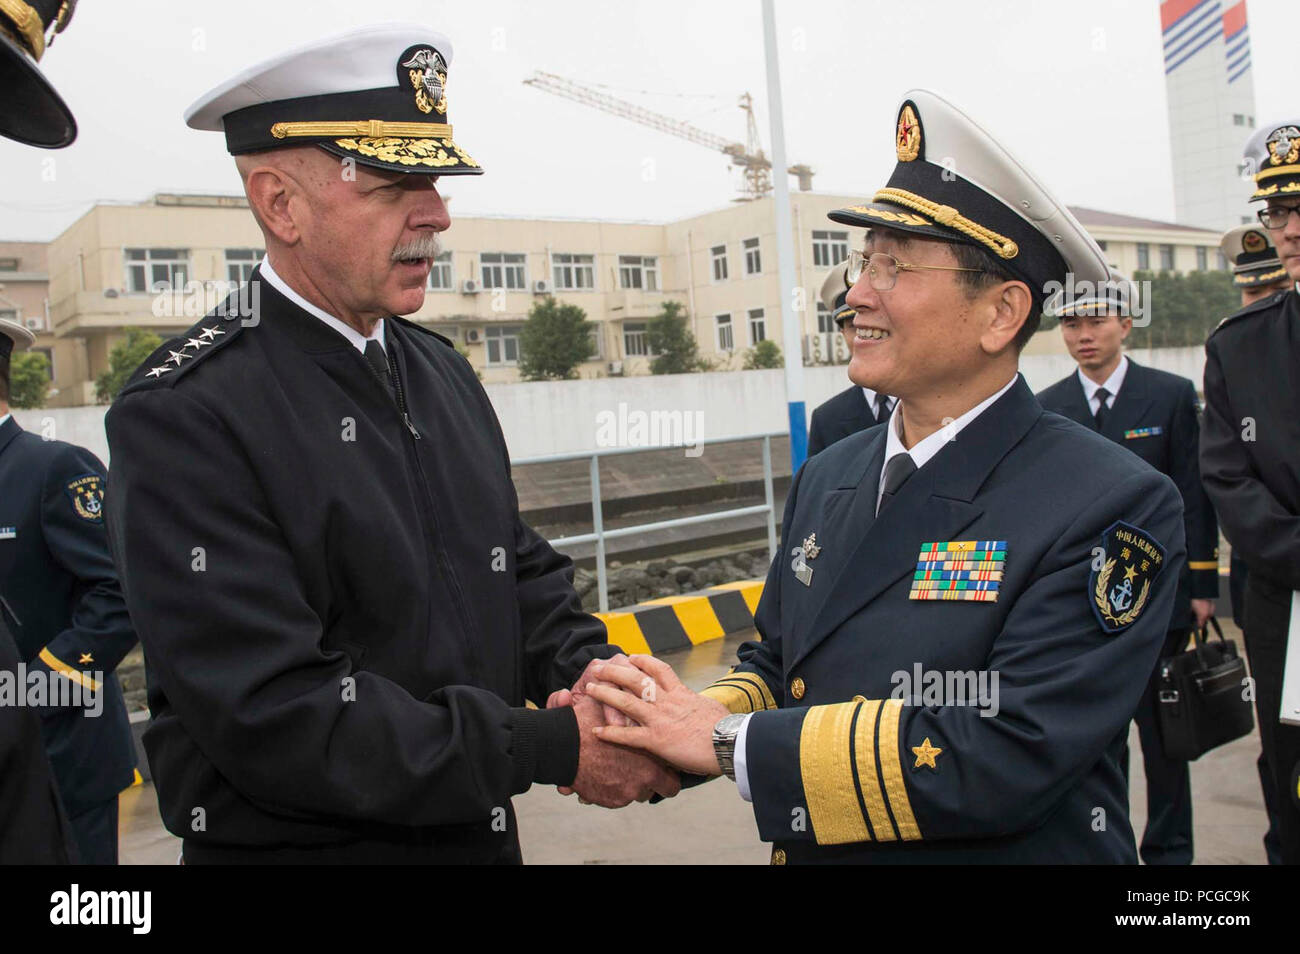 SHANGHAI (Nov. 17, 2015) Adm. Scott H. Swift, commander U.S. Pacific Fleet, greets Vice Adm. Su Zhiqian, the East Sea Fleet Commander of Chinese People’s Liberation Army (Navy), after touring the PLA Navy Jiangkai II class guided-missile frigate Xuzhou (FFG 530), during a scheduled port visit of the forward-deployed Arleigh Burke-class guided missile destroyer USS Stethem (DDG 63). Stethem is in Shanghai to build relationships with the PLA Navy and demonstrate the U.S. Navy’s commitment to the Indo-Asia-Pacific. Stock Photo